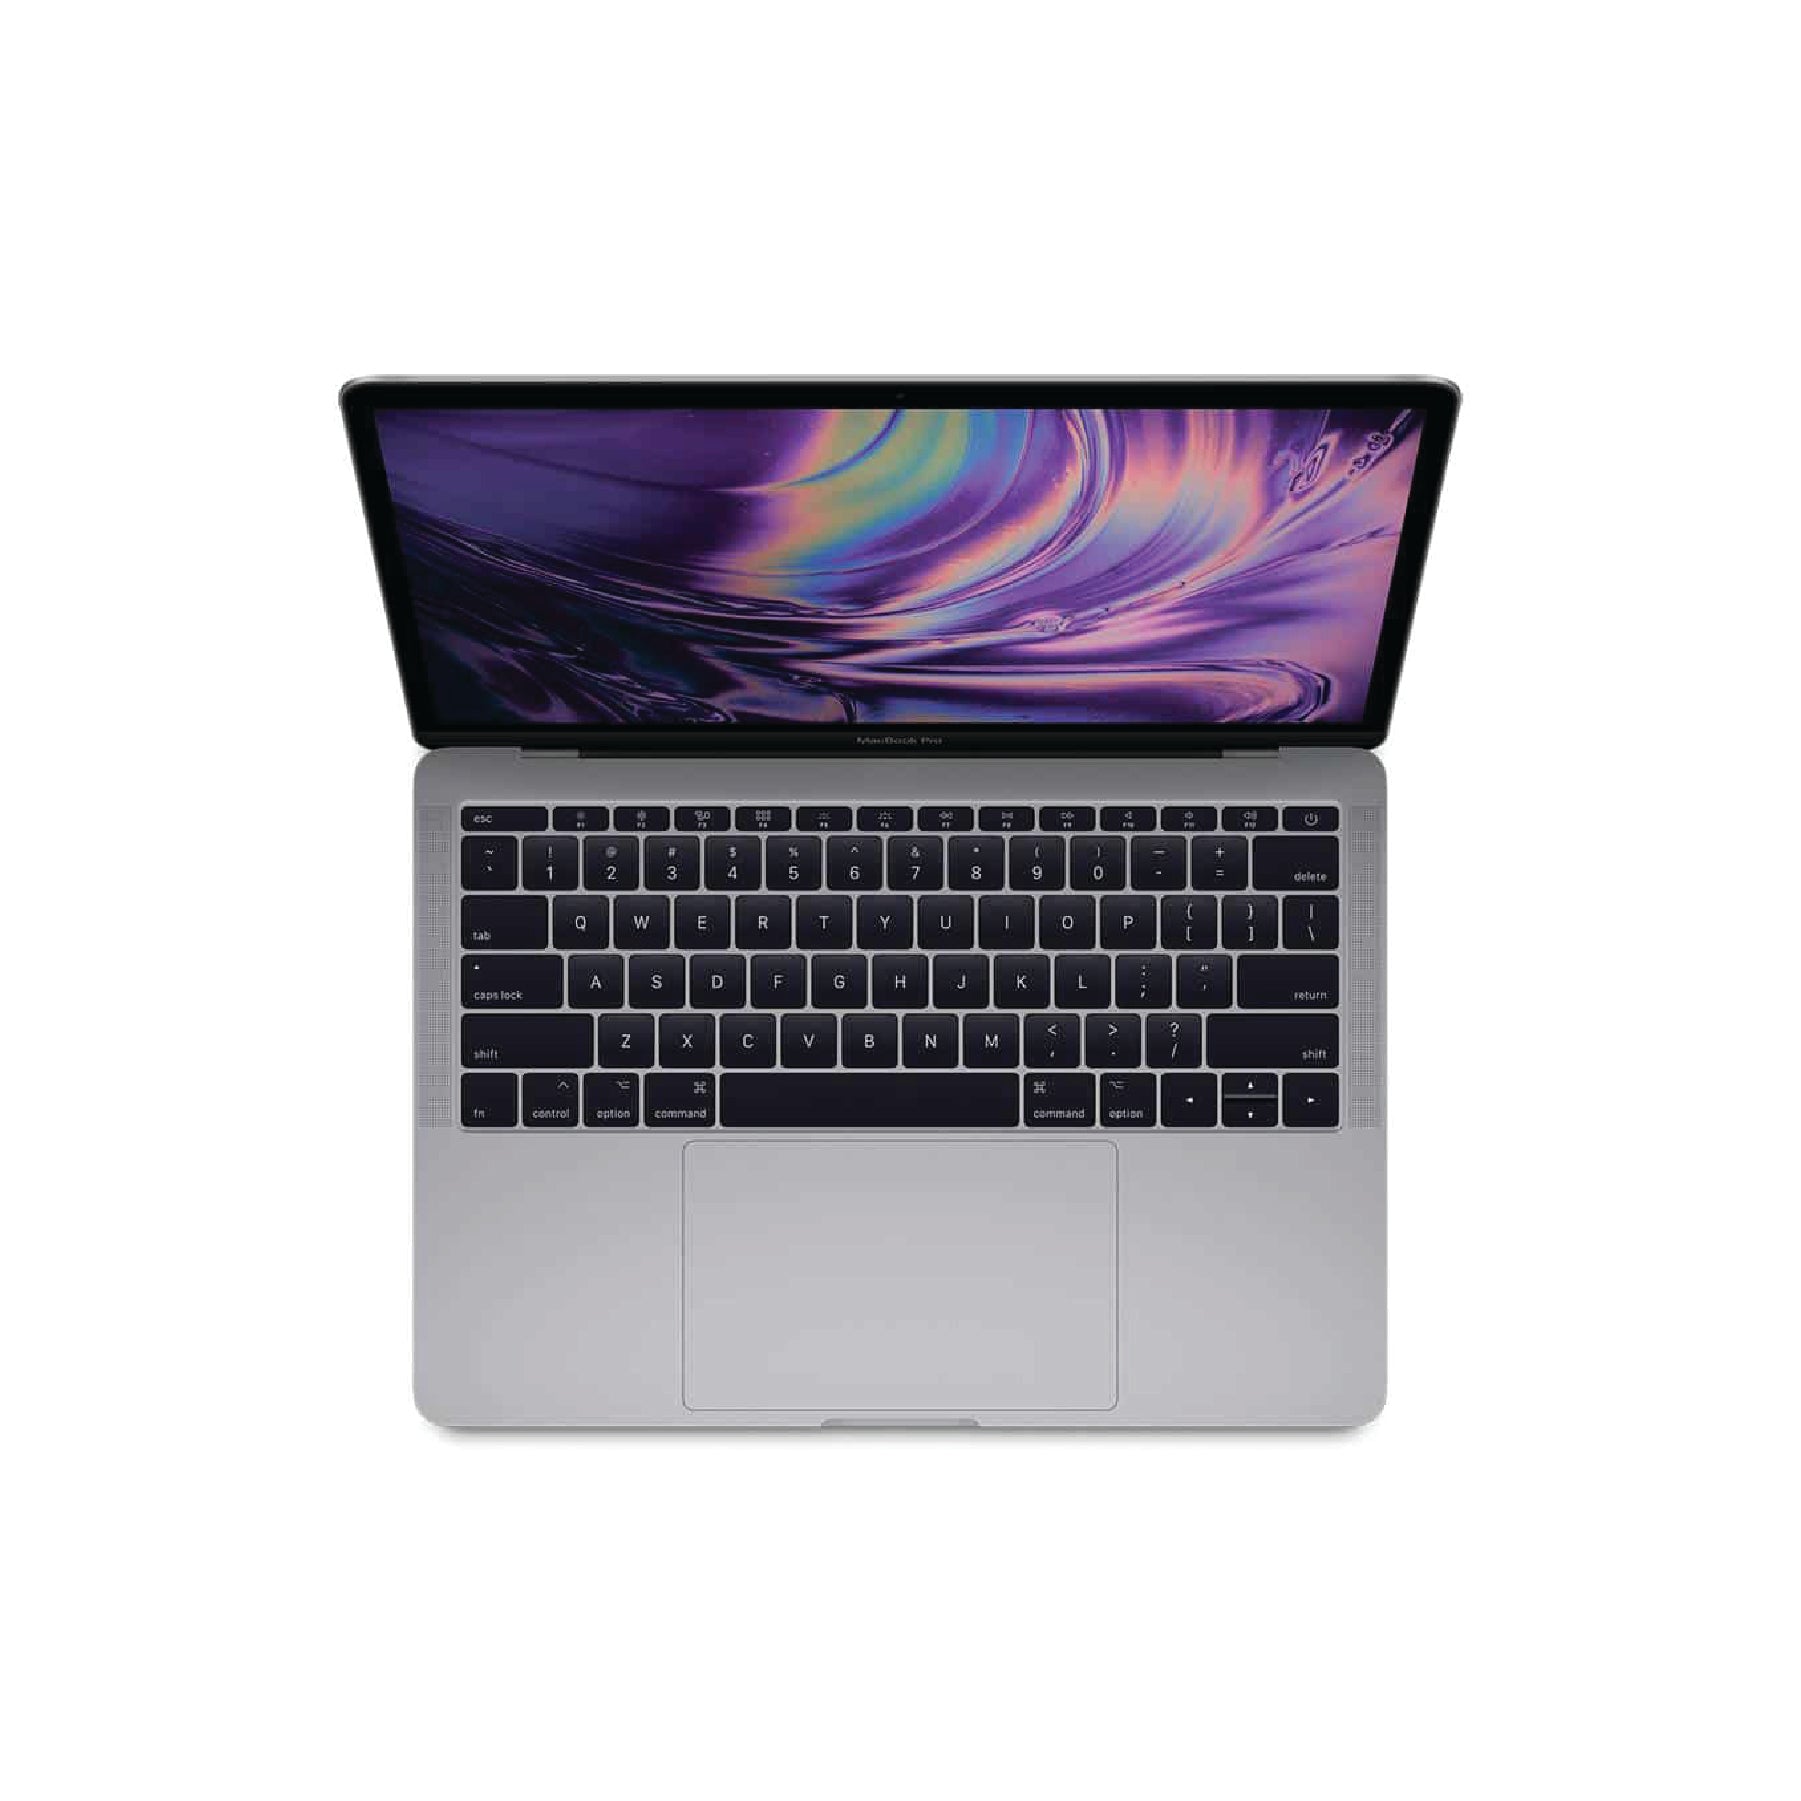 MacBook Pro (13-inch, 2016, Two Thunderbolt 3 ports) 2.0GHz, Intel Cor